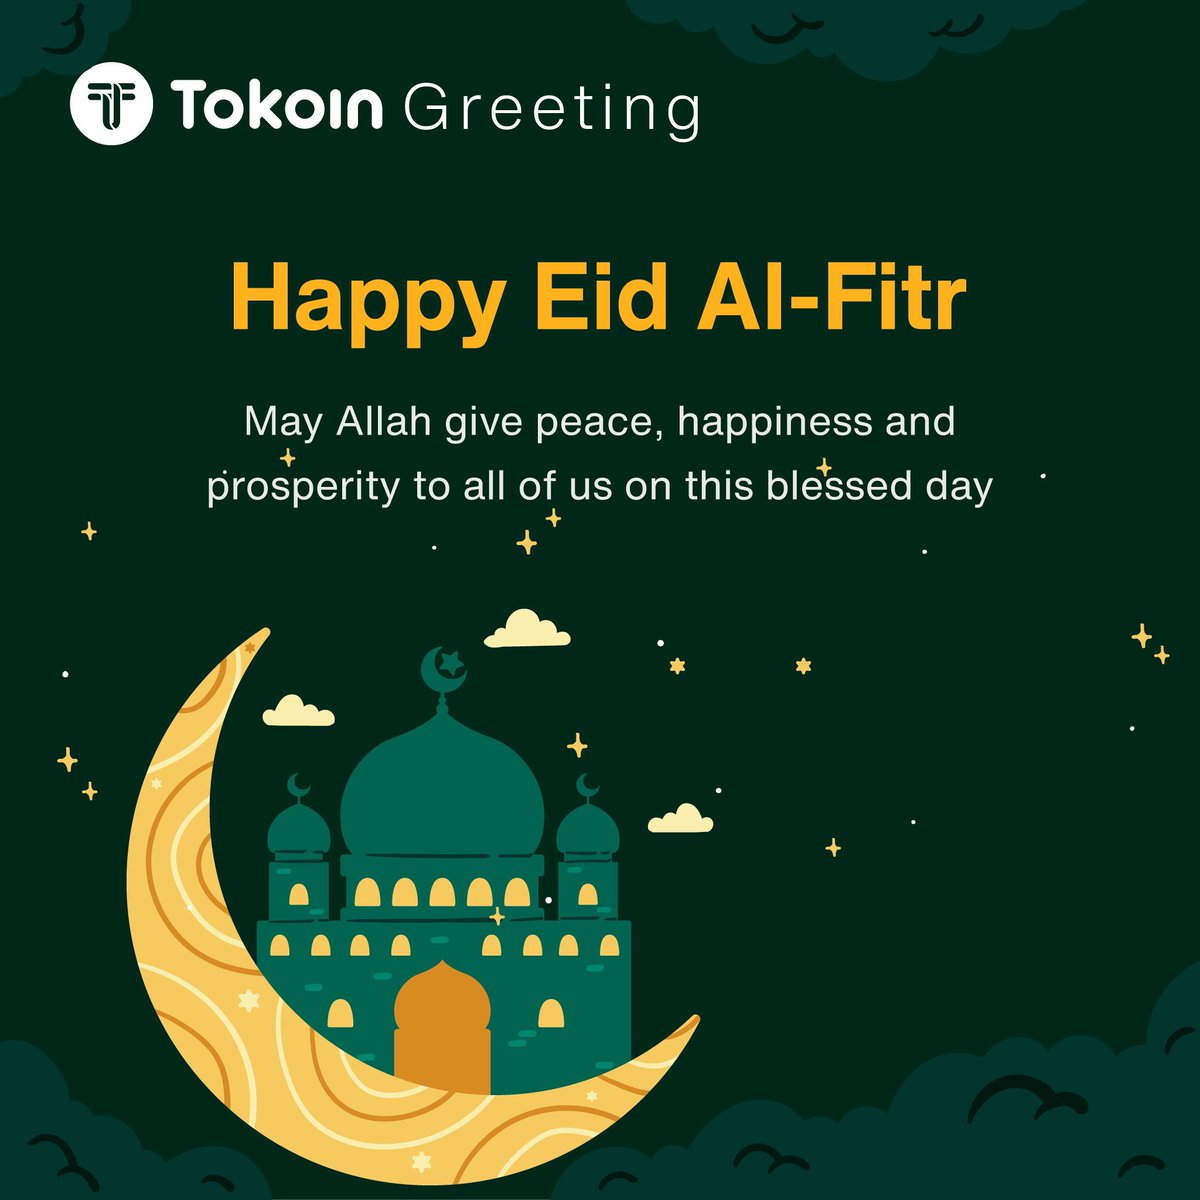 The Tokoin team wishes you a joyous and blessed Eid al-Fitr! May Allah grant us all peace, joy, and prosperity on this blessed day. ✨